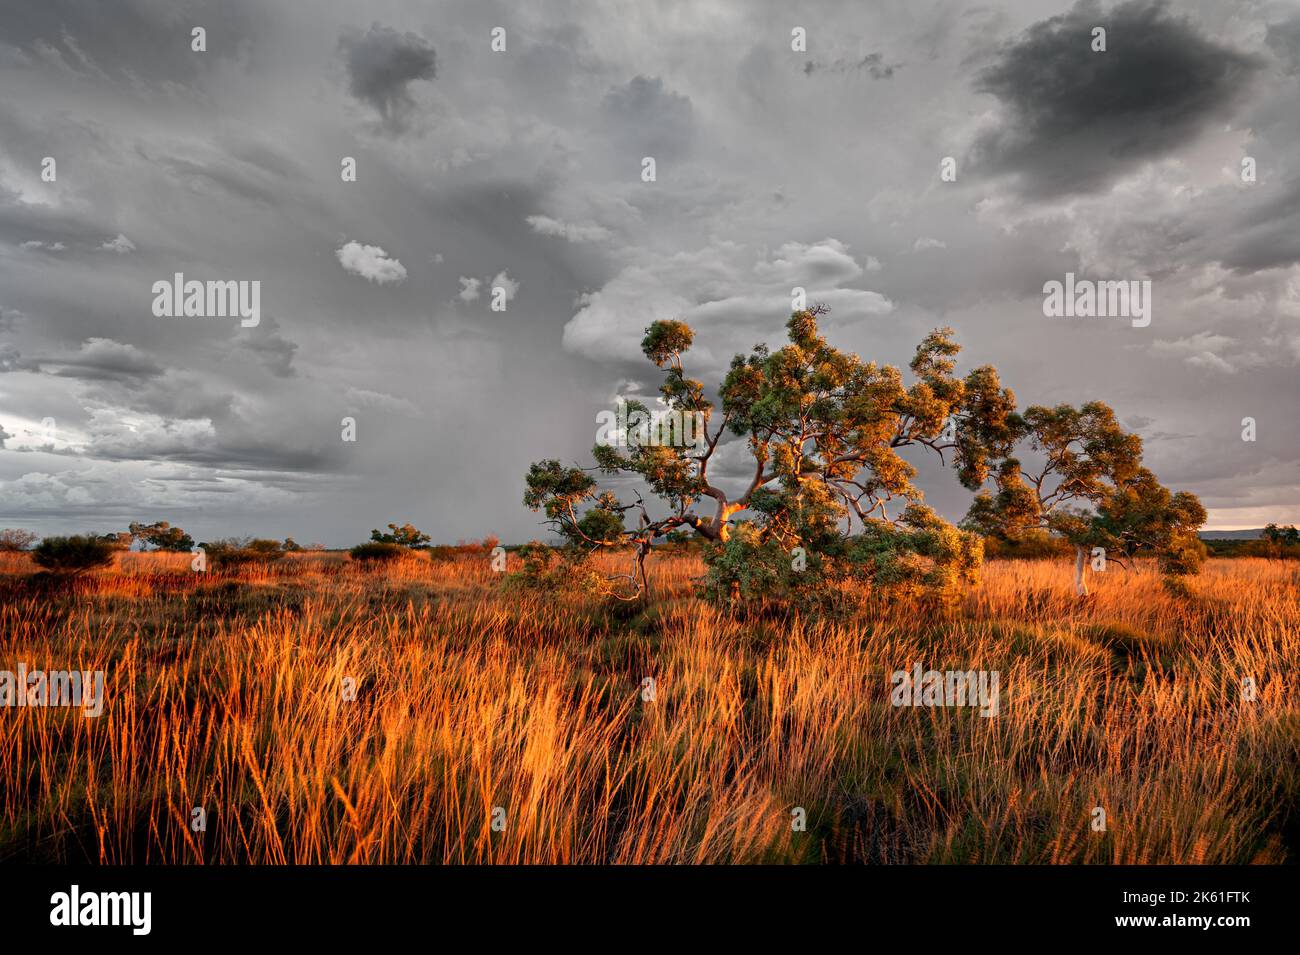 Gnarled eucalyptus tree in colourful evening light under an approaching storm. Stock Photo